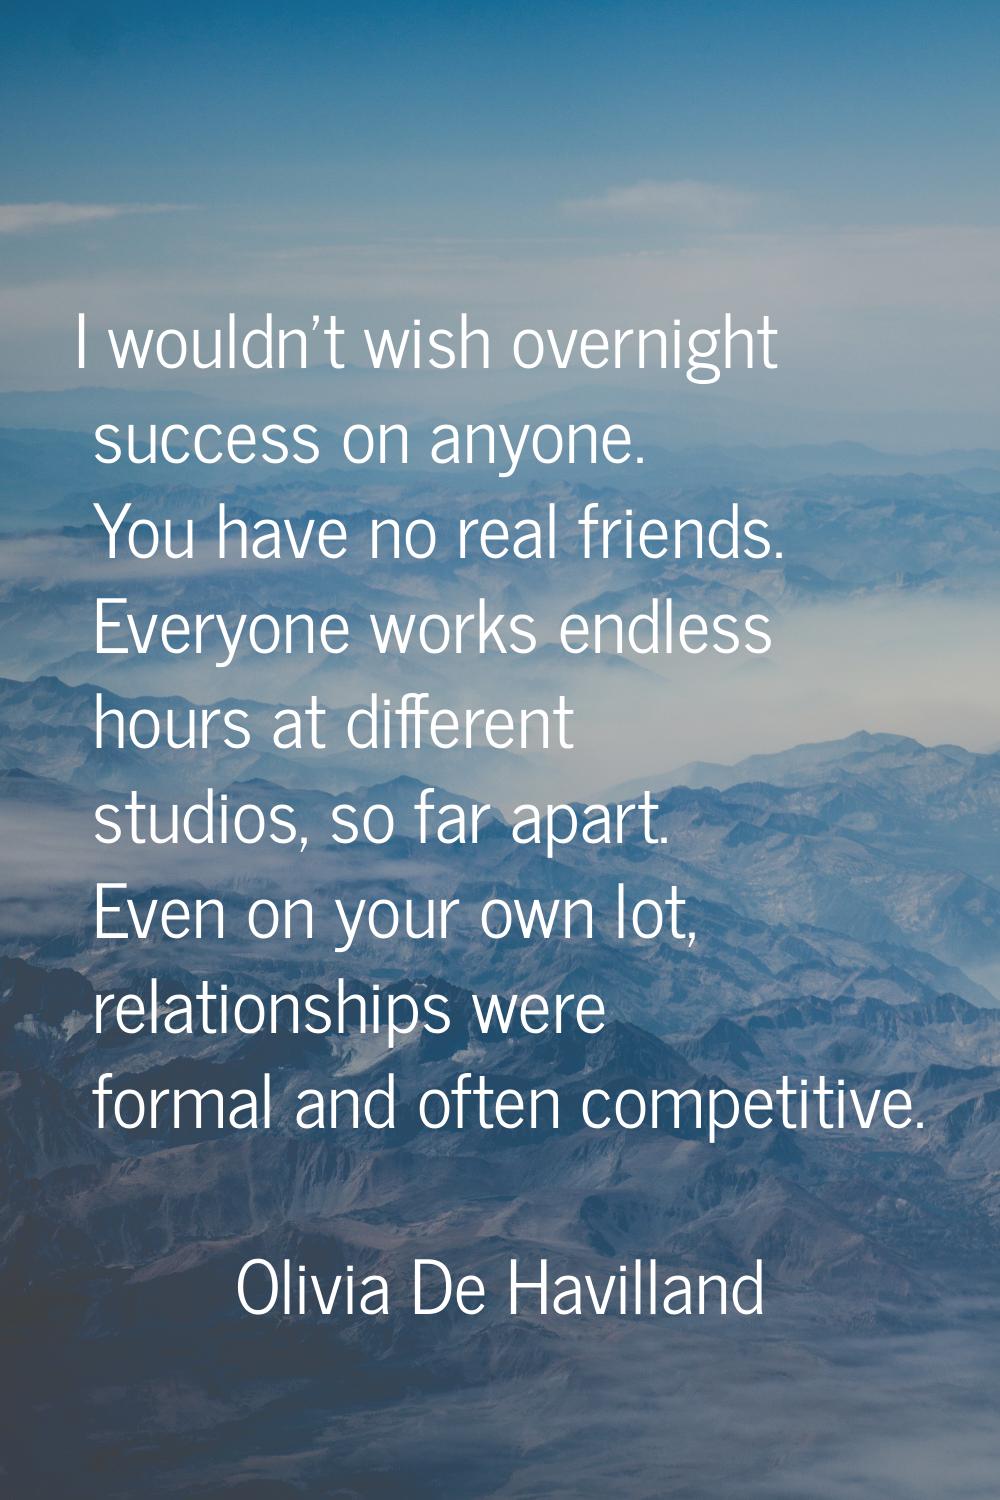 I wouldn't wish overnight success on anyone. You have no real friends. Everyone works endless hours